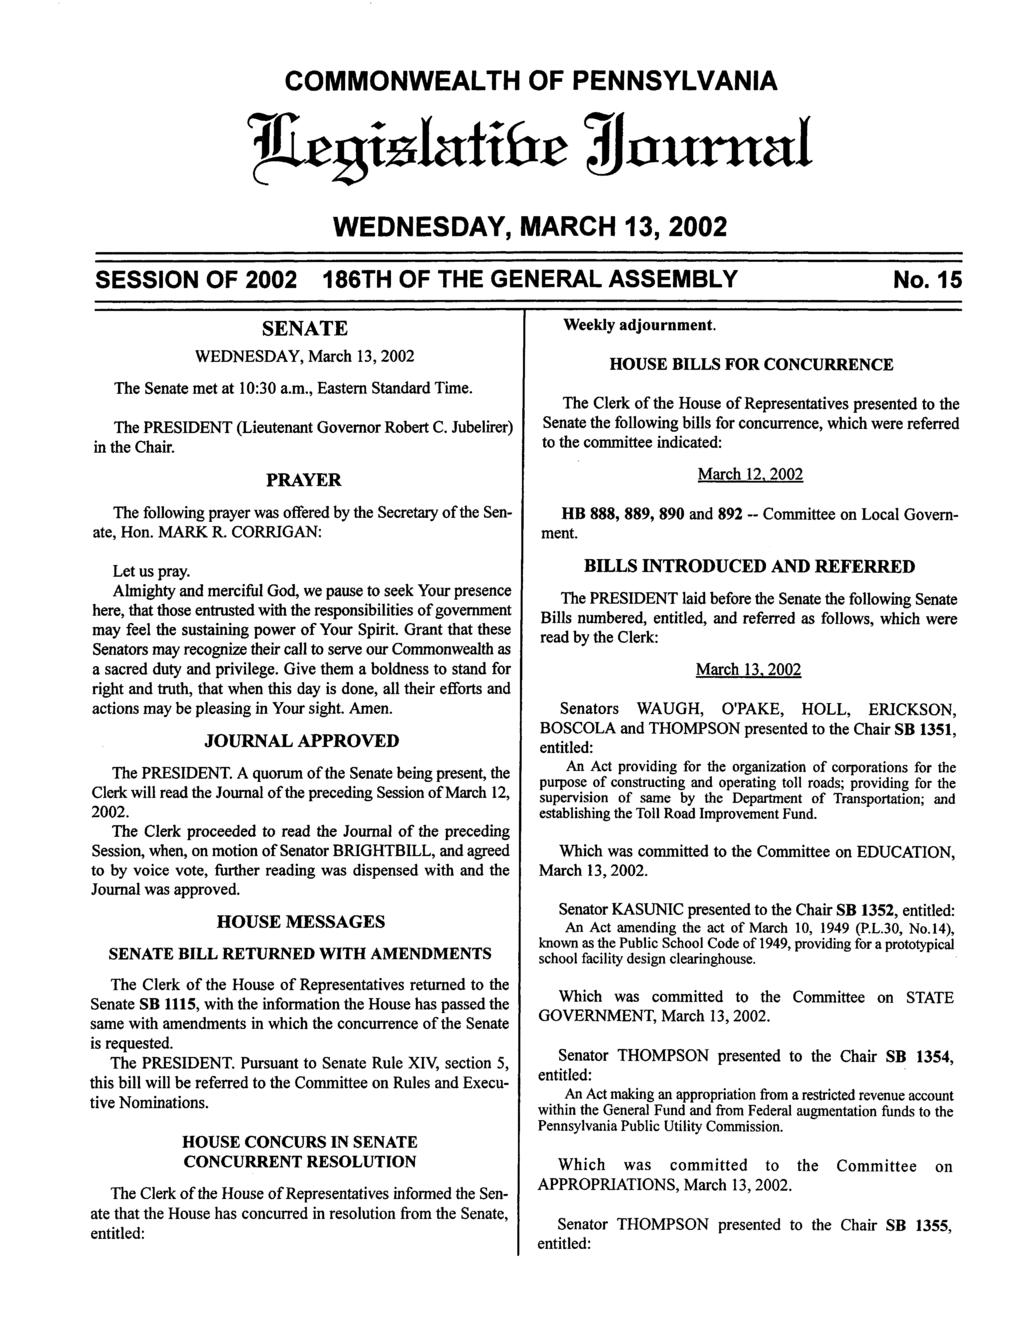 COMMONWEALTH OF PENNSYLVANIA JiegtslHttfre ^uurtml WEDNESDAY, MARCH 13, 2002 SESSION OF 2002 186TH OF THE GENERAL ASSEMBLY No. 15 SENATE WEDNESDAY, March 13,2002 The Senate met at 10:30 a.m., Eastern Standard Time.